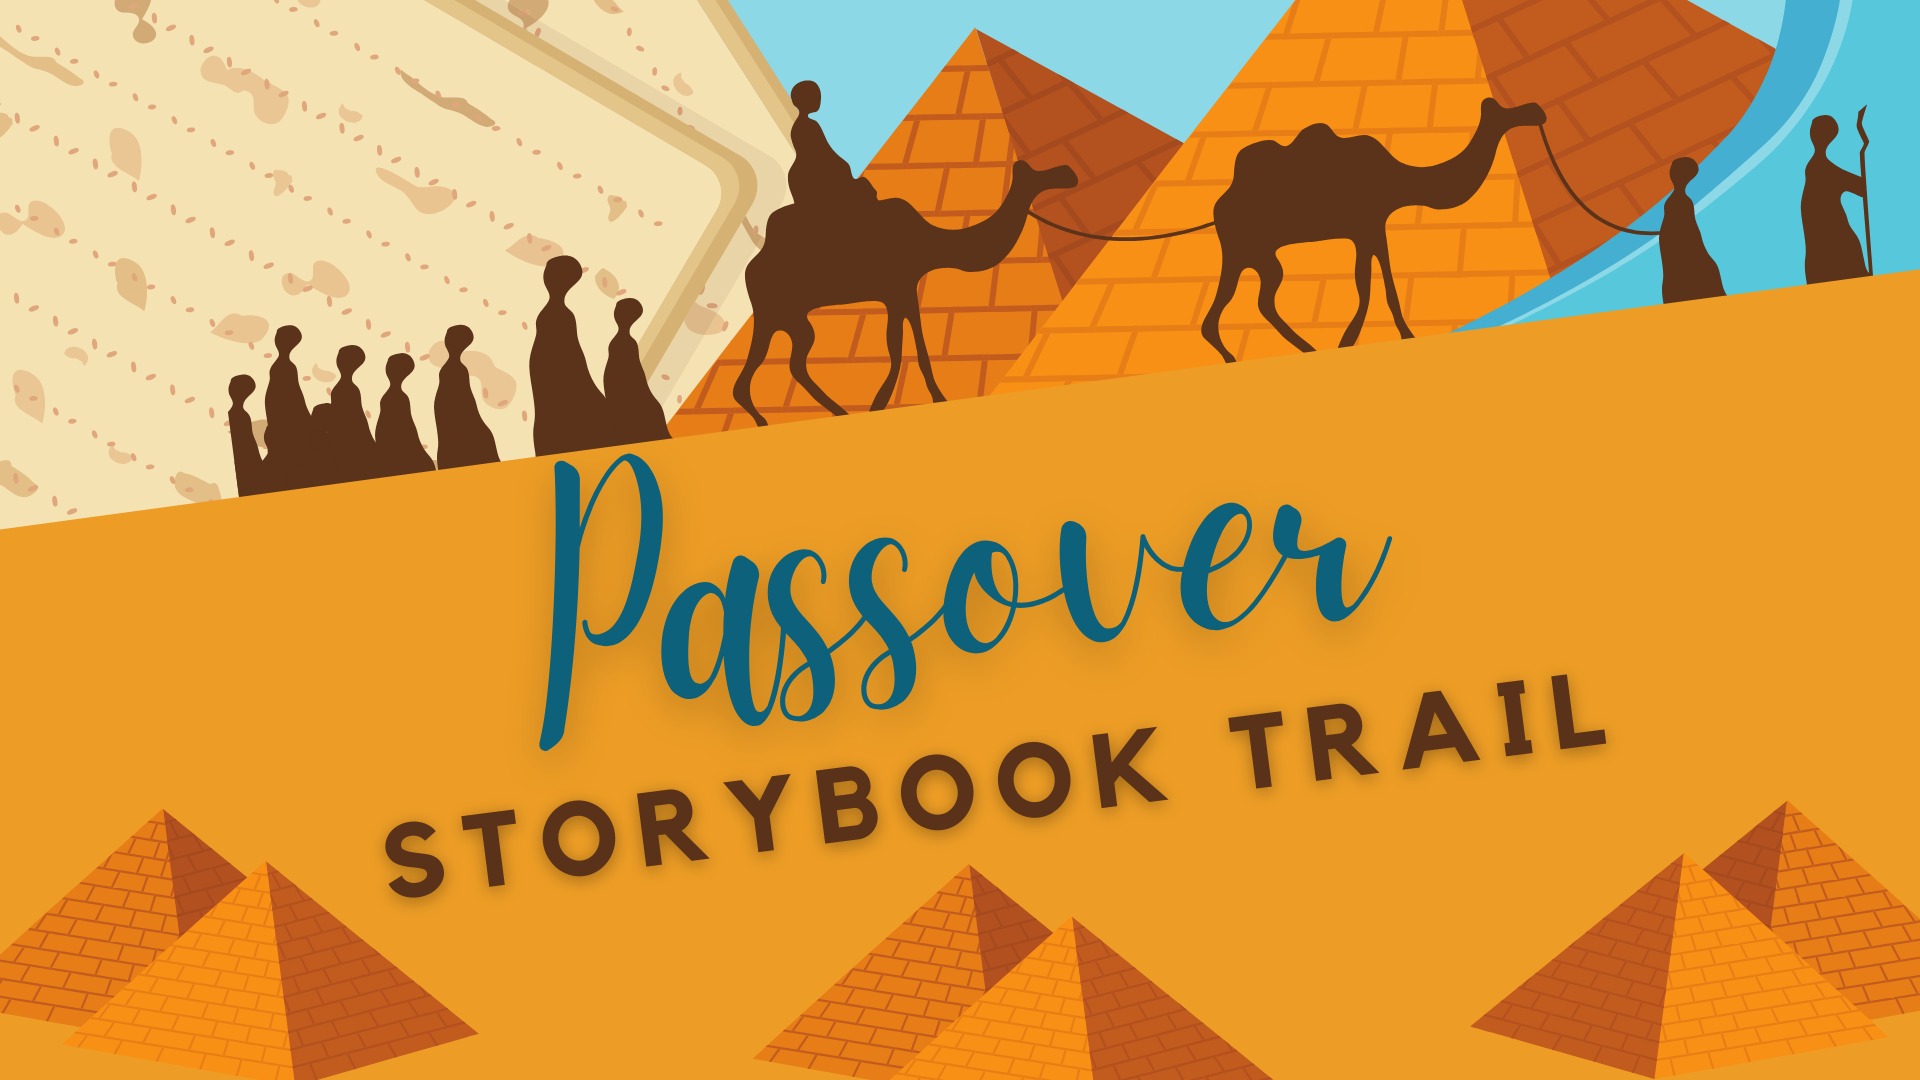 passover story trail (1920 x 1080 px).png